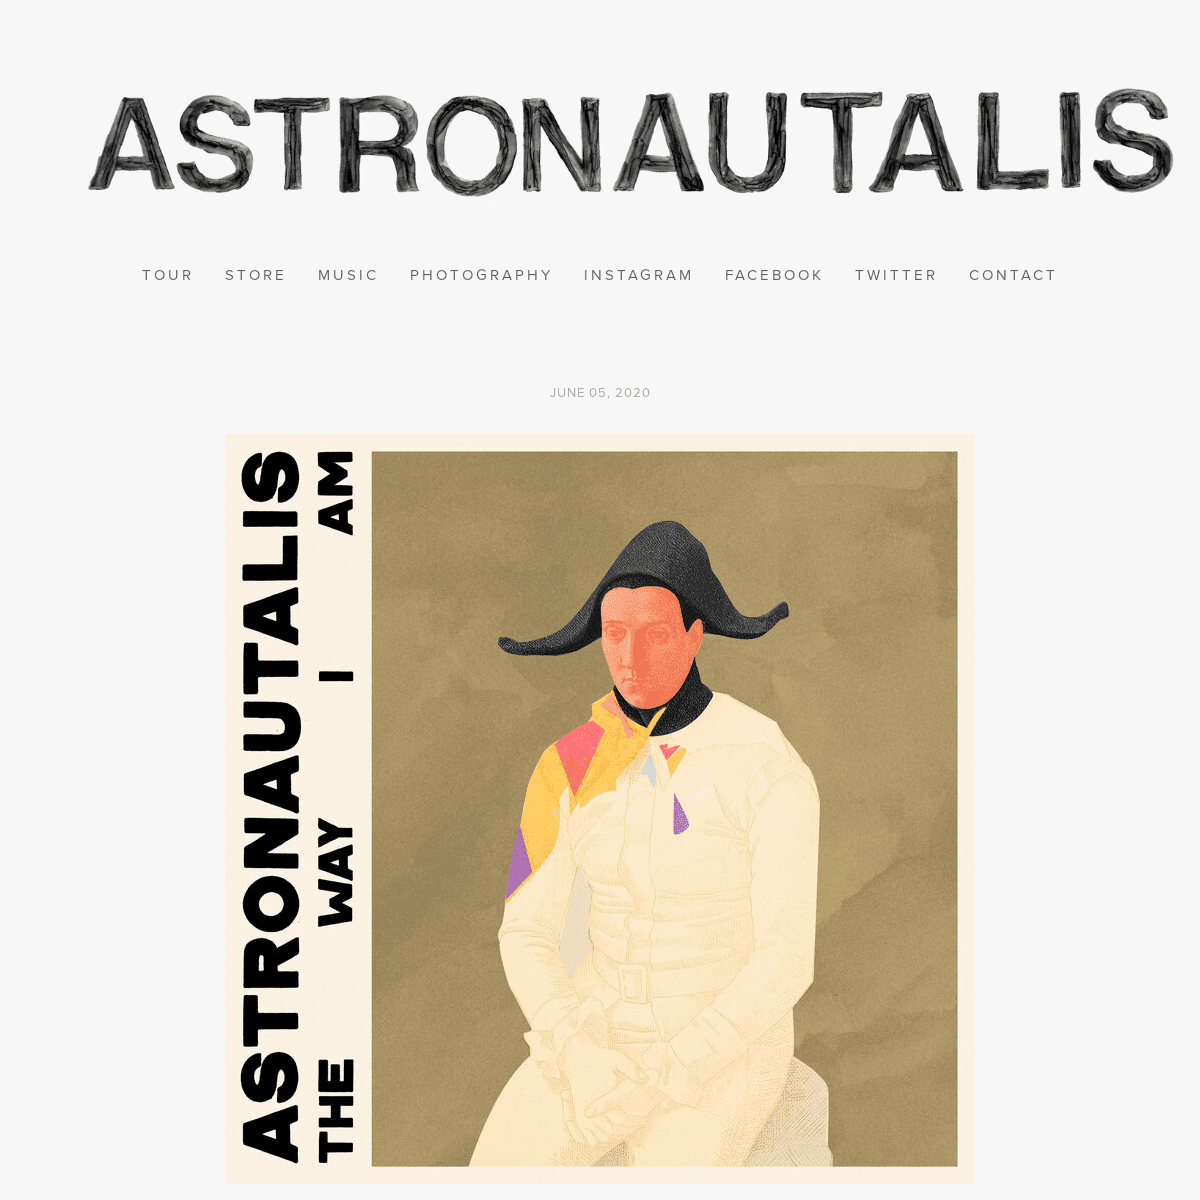 A complete backup of https://astronautalis.com